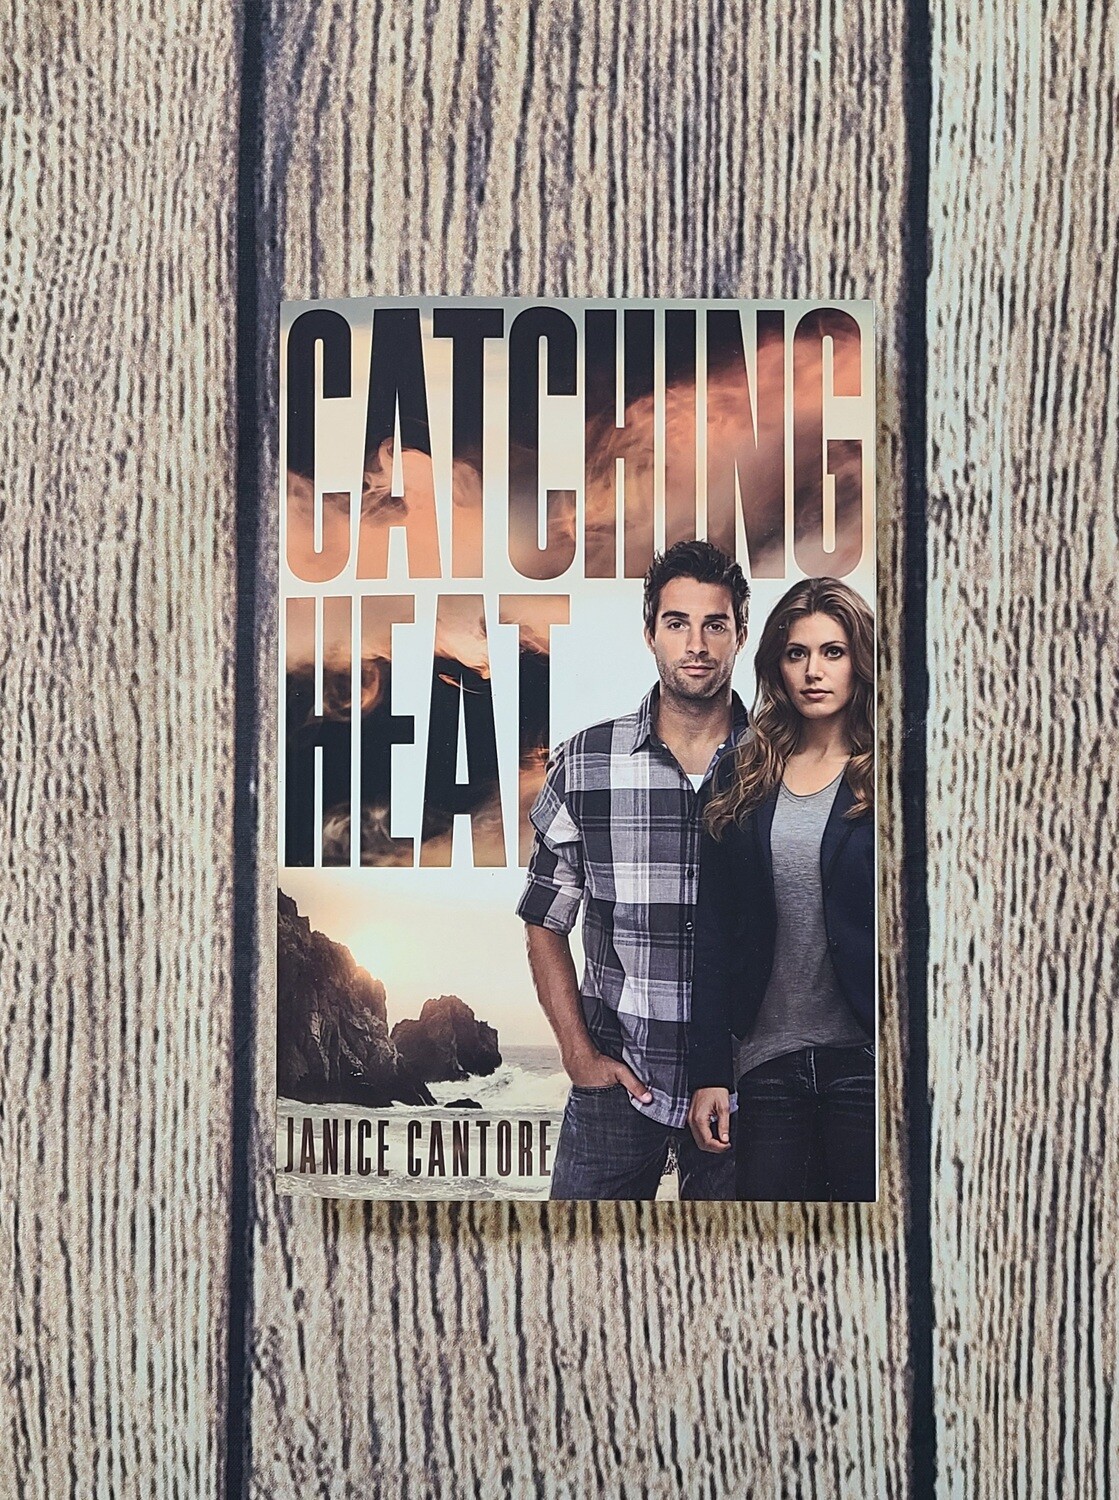 Catching Heat by Janice Cantore